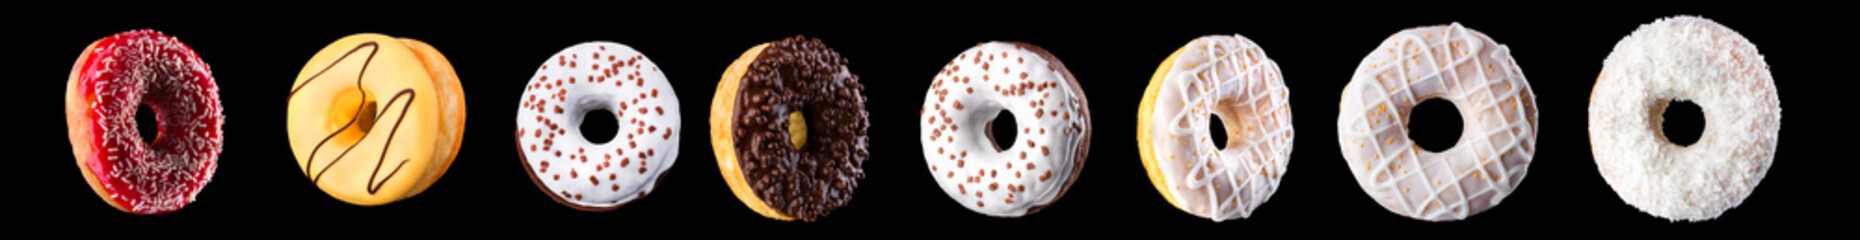 Set of chocolate donut isolated on a black background with reflection